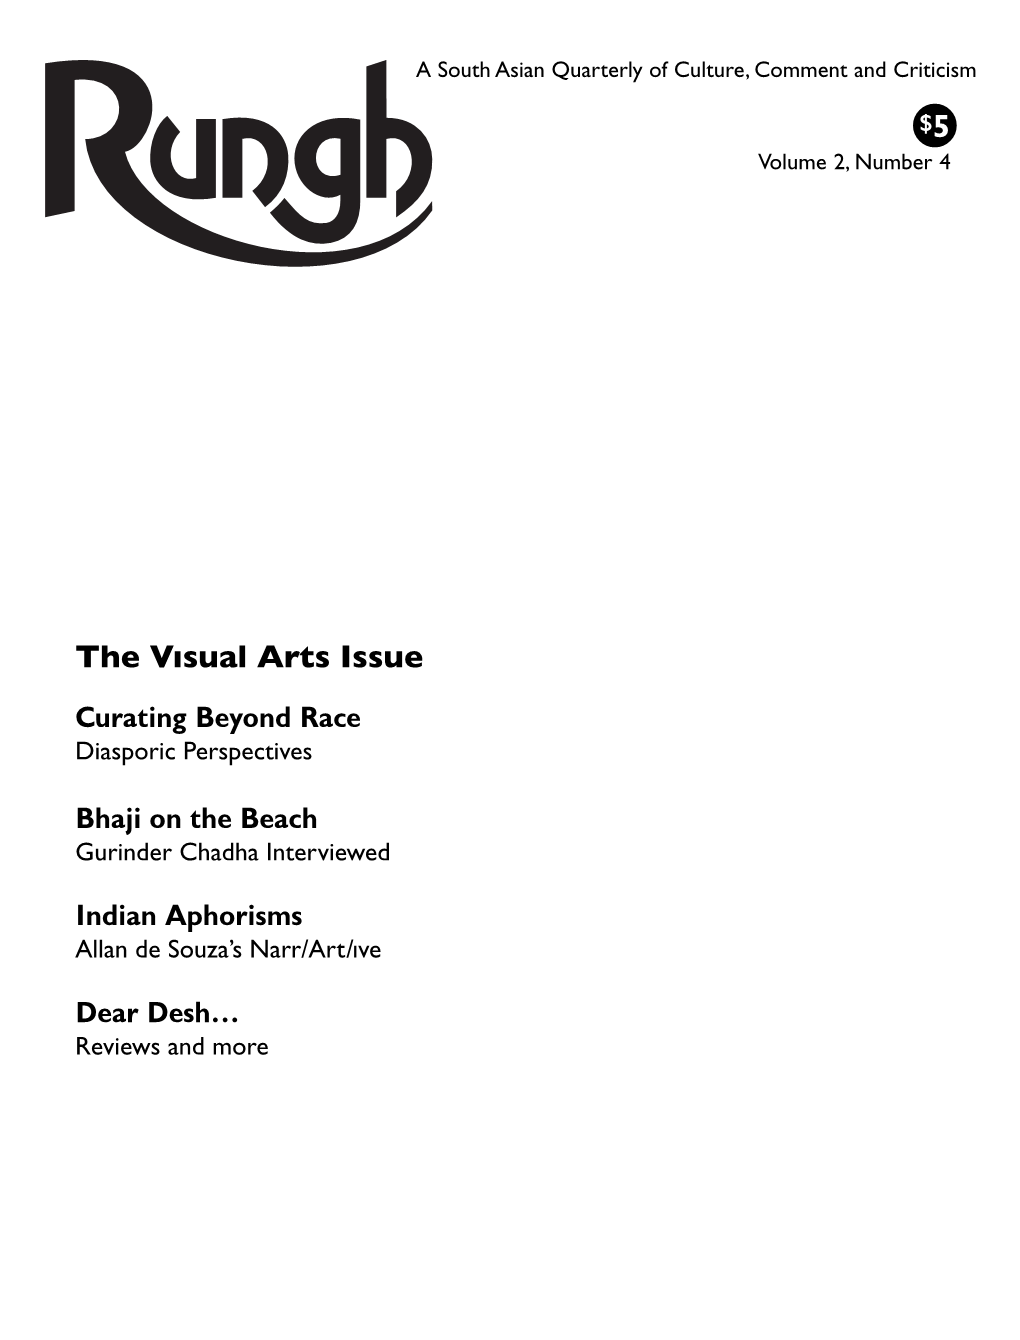 The Vısual Arts Issue